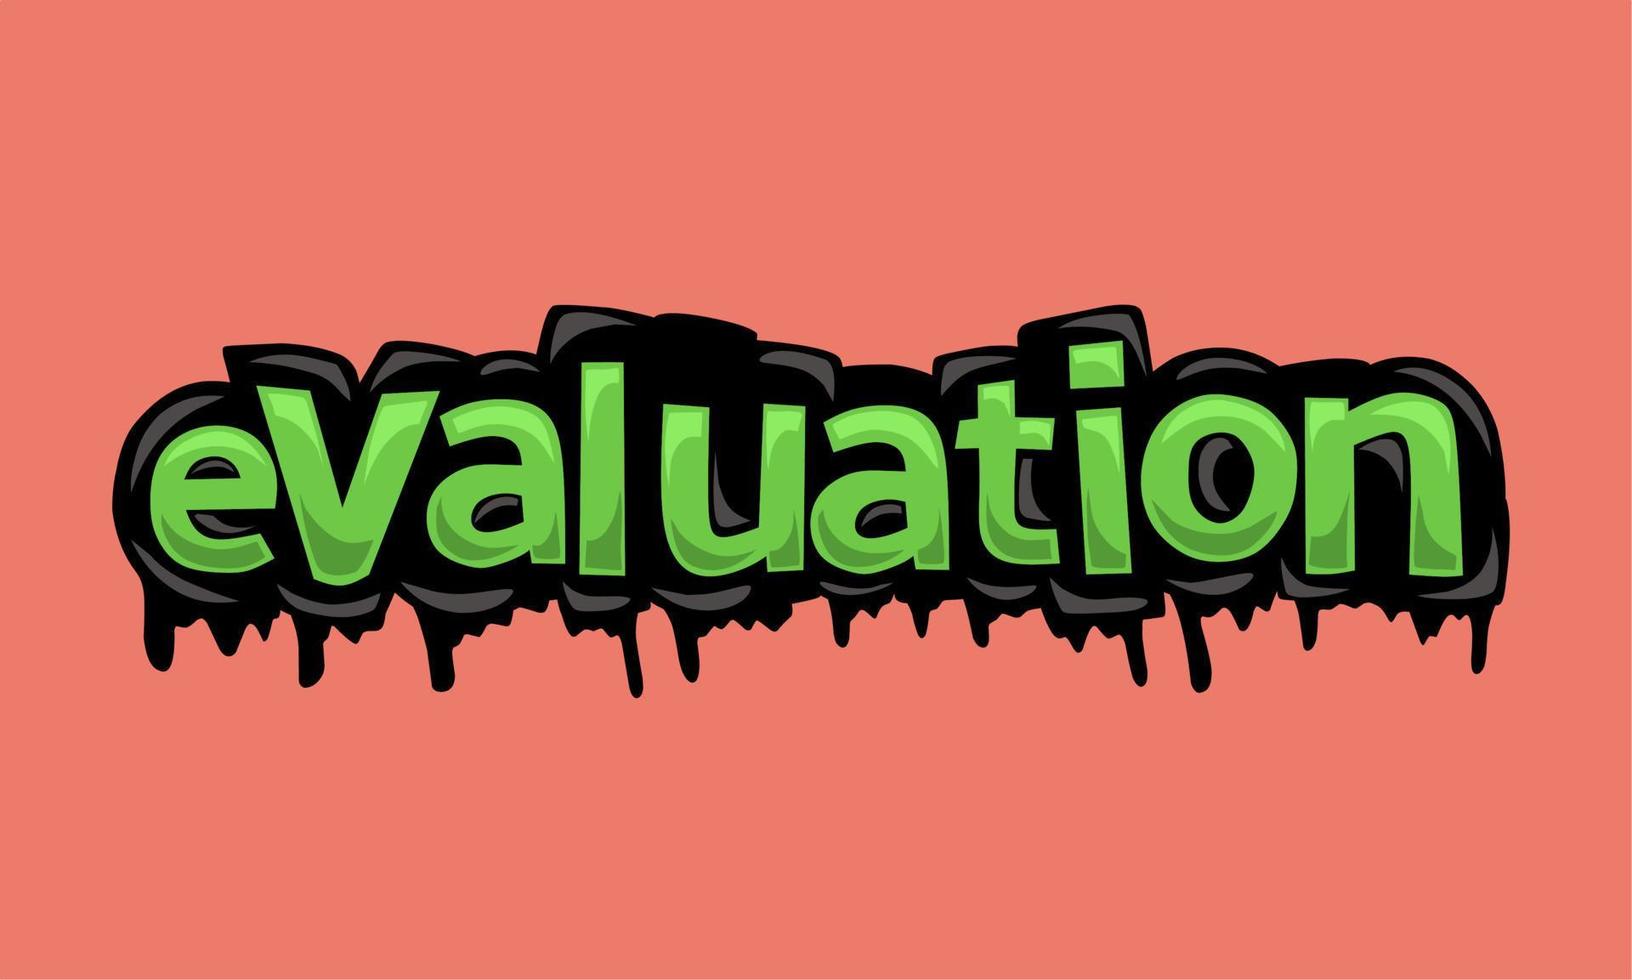 EVALUATION writing vector design on pink  background